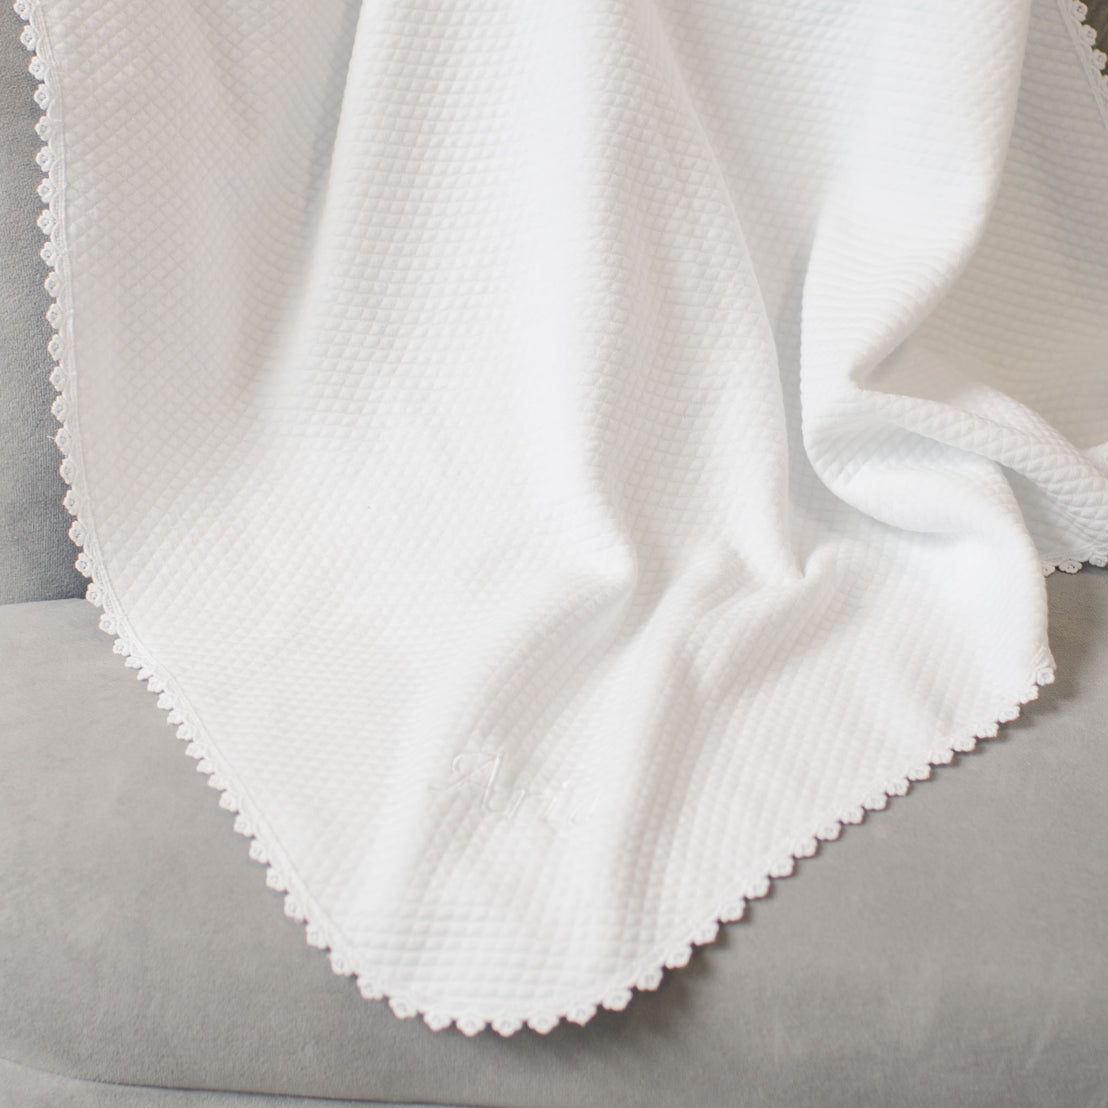 Close-up of a white textured cotton Aria Personalized Blanket with delicate embroidery detail, draped over a grey cushioned surface.